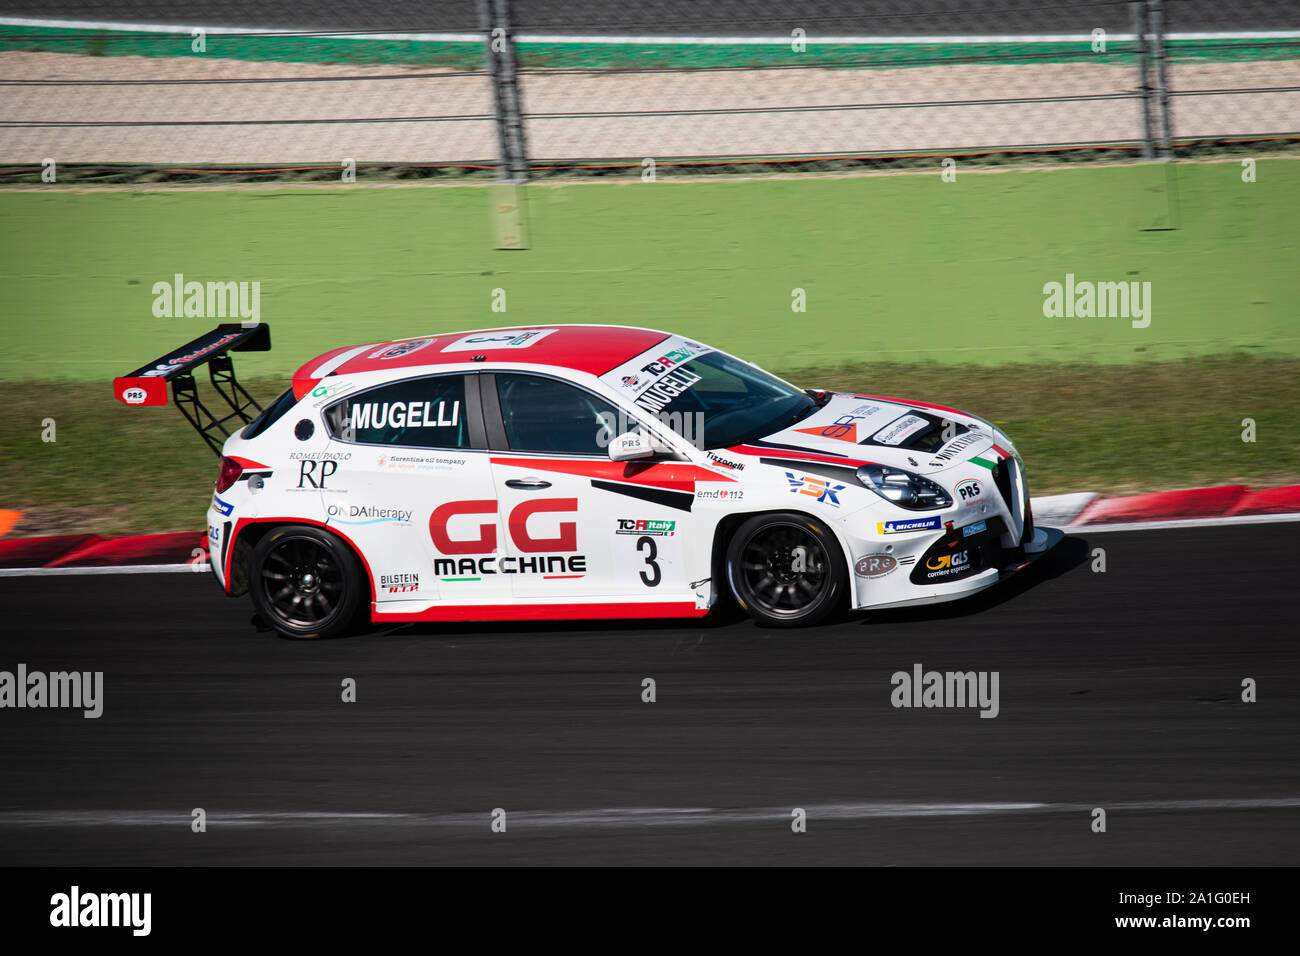 Vallelunga, Italy september 14 2019. Full length of racing Alfa Romeo Giulietta racing car in action during race blurred motion background Stock Photo